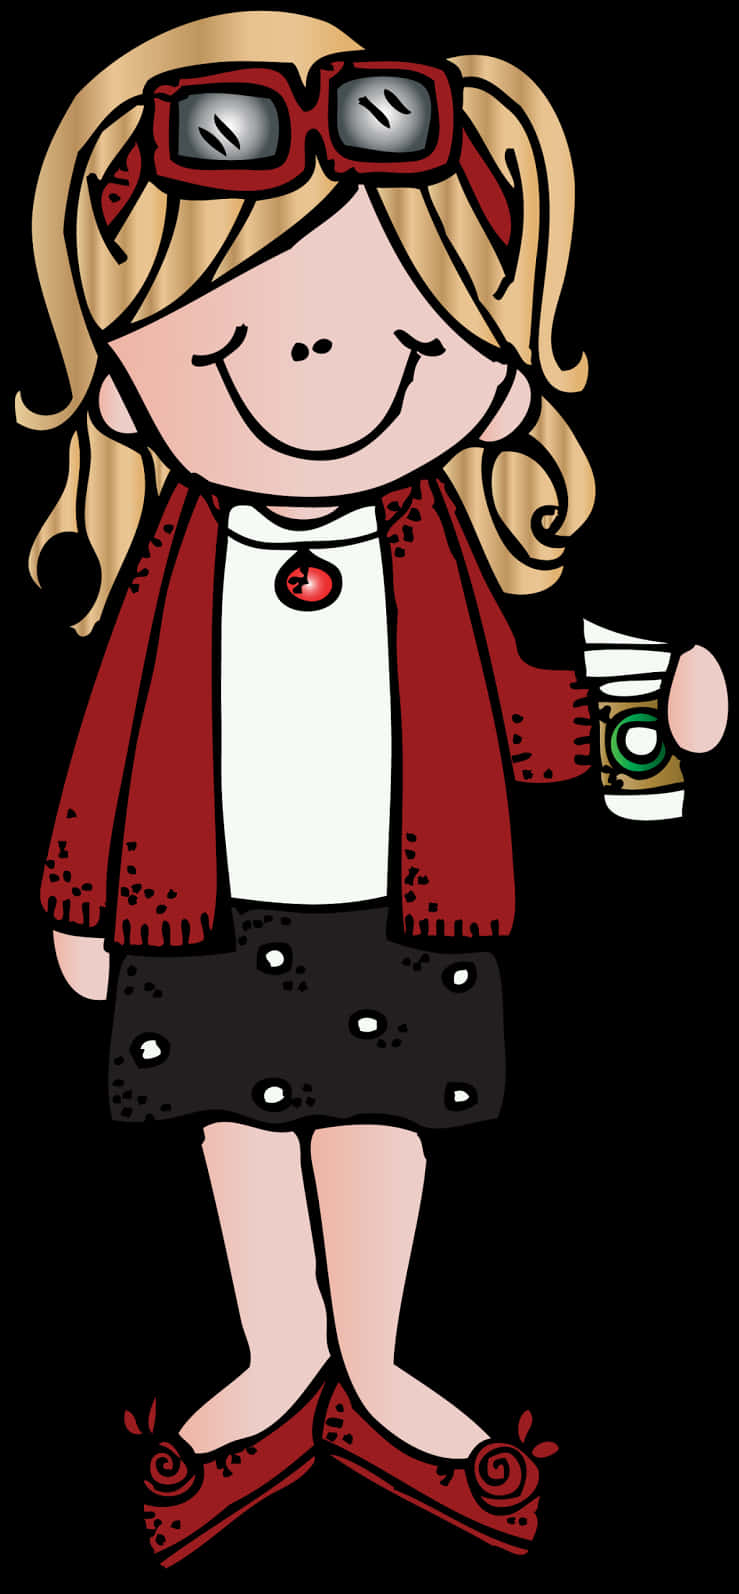 A Cartoon Of A Girl Holding A Coffee Cup